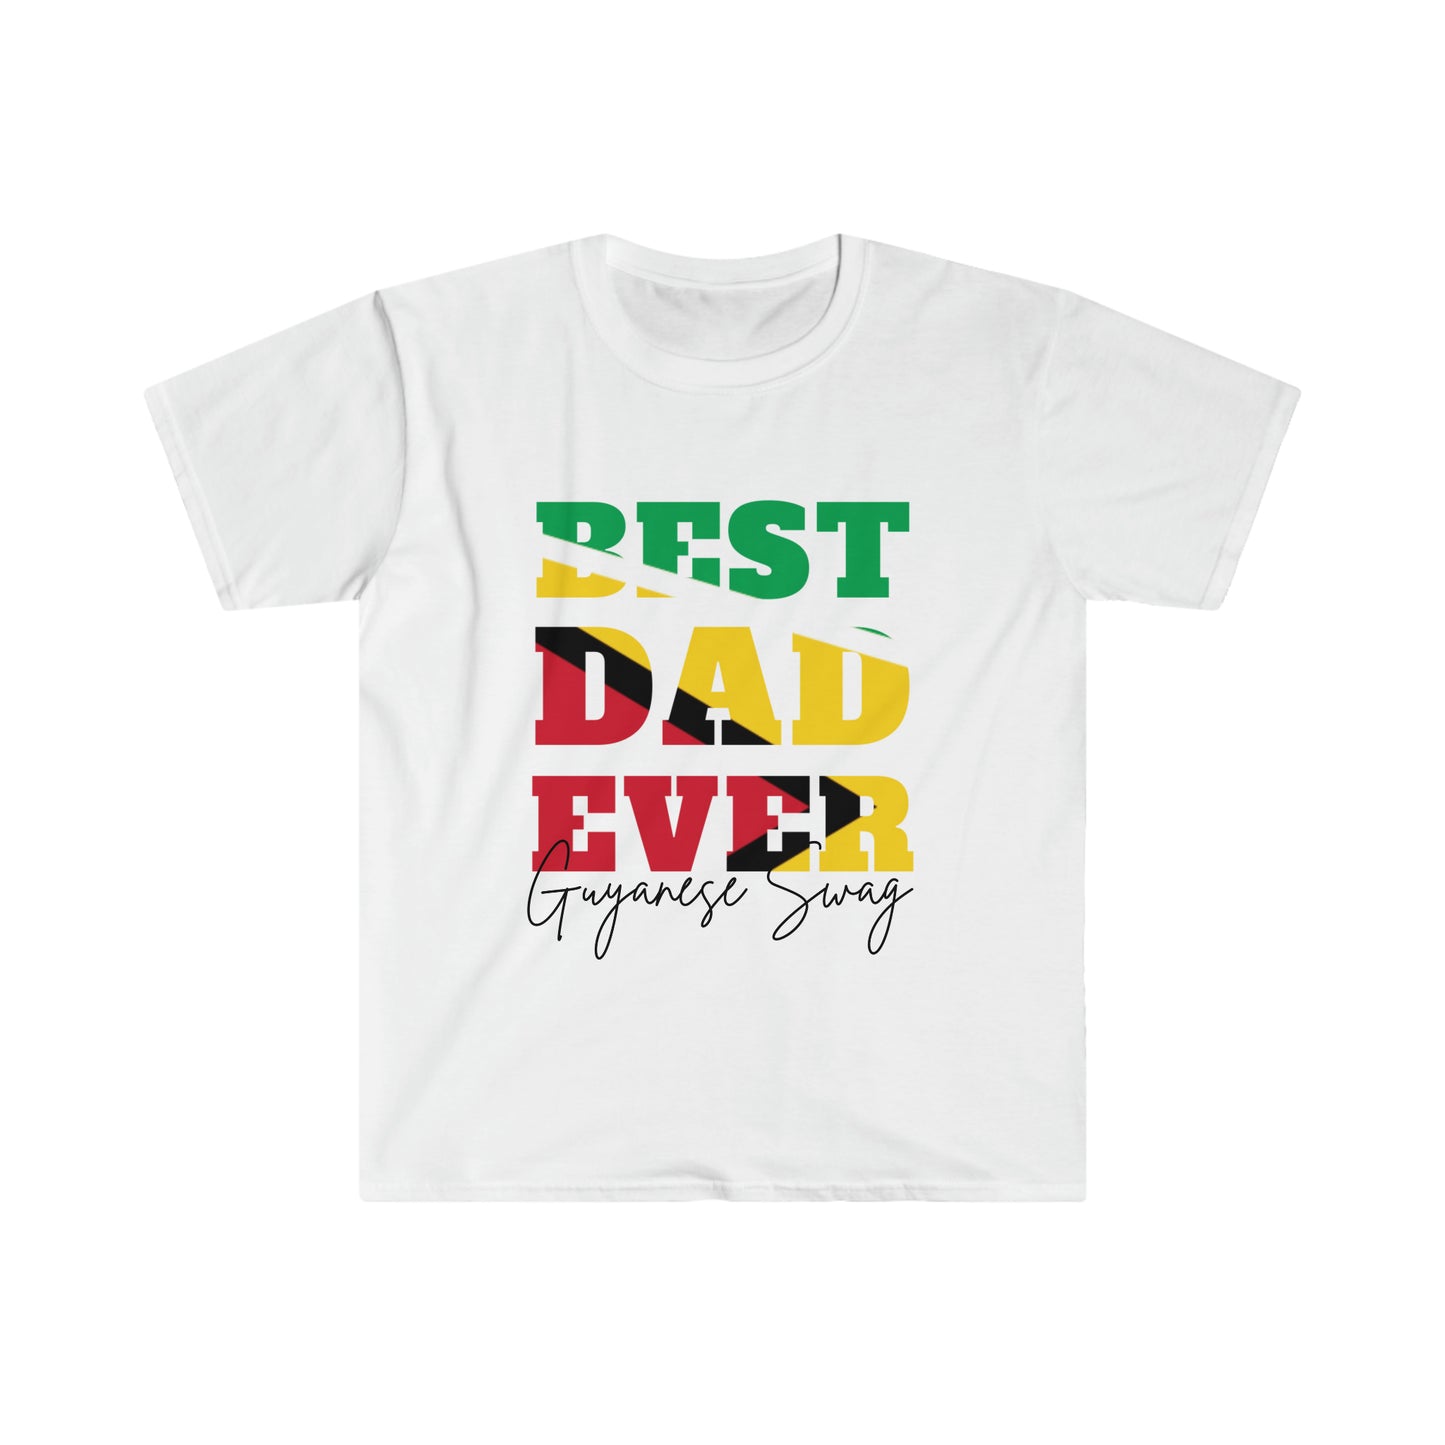 Father's Day Best Dad Ever Men Soft Style Shirt Sleeve T-Shirt by Guyanese Swag.